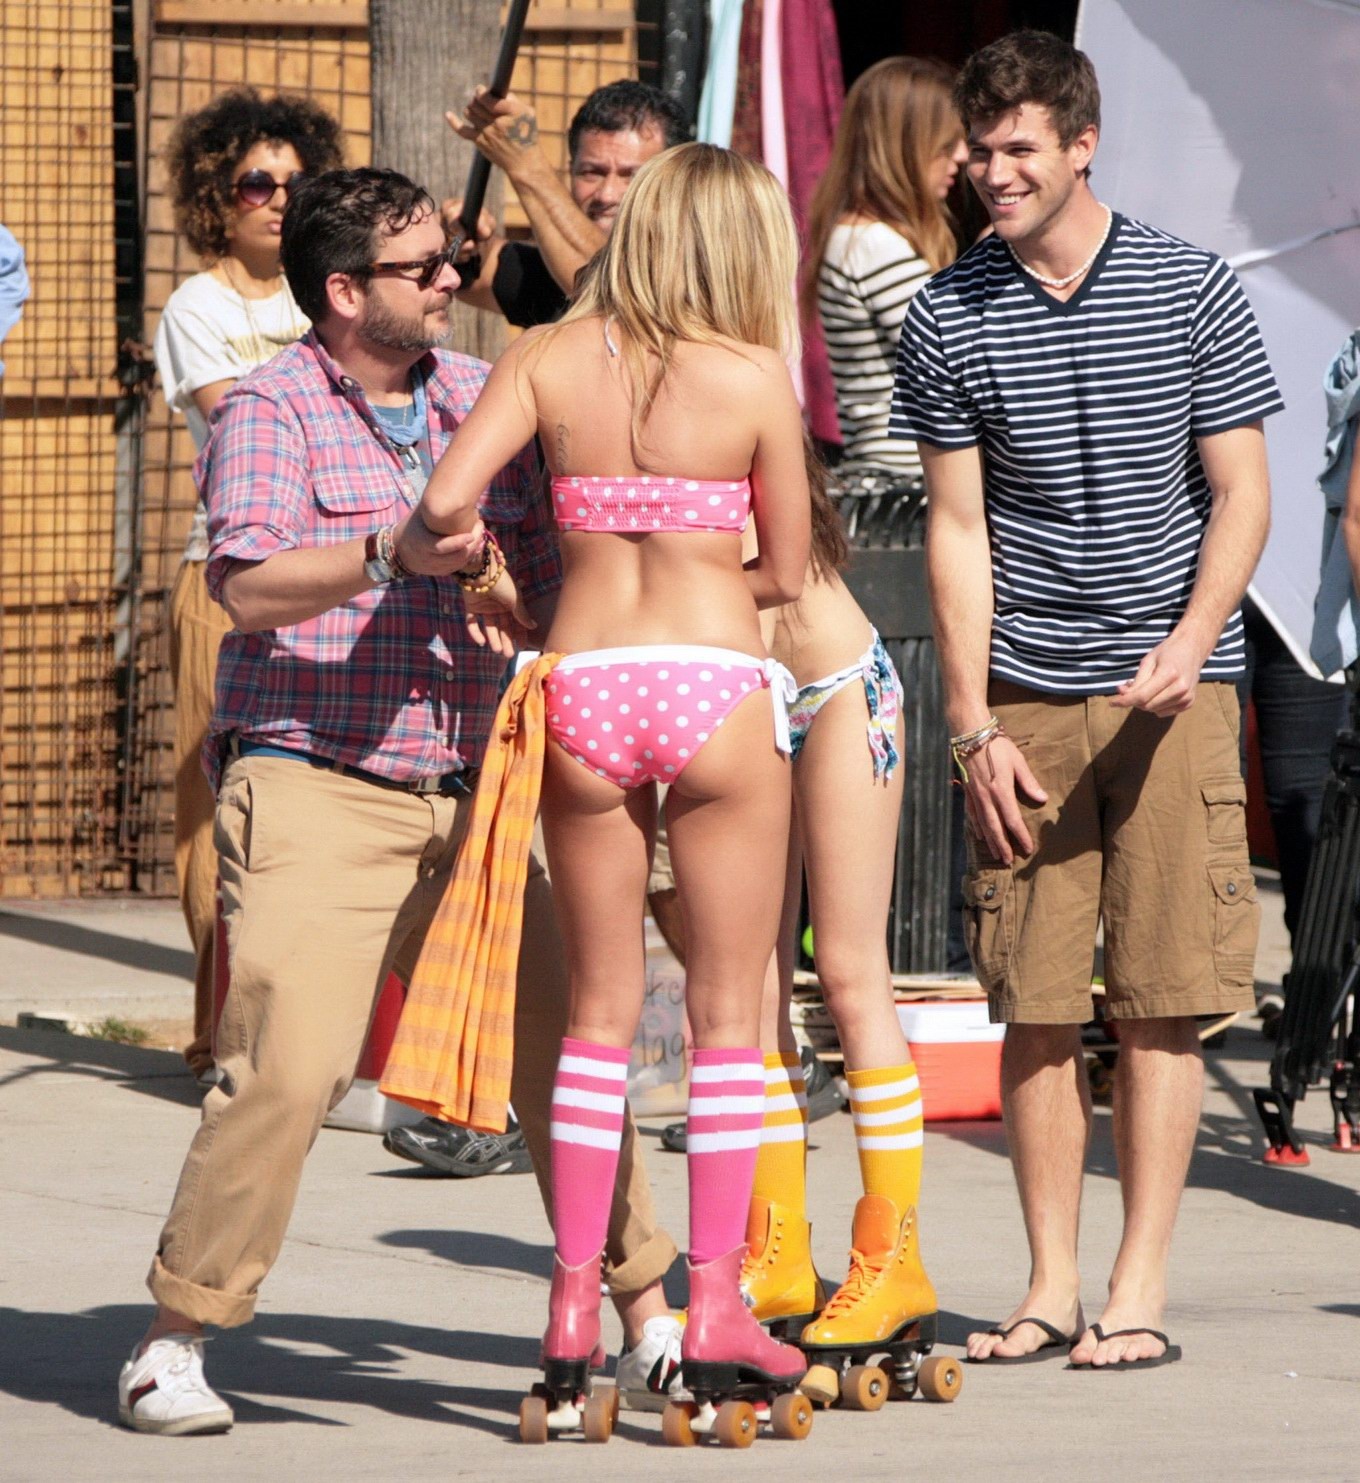 Ashley Tisdale roller skating in bikini at the photoshoot in Venice Beach #75274519